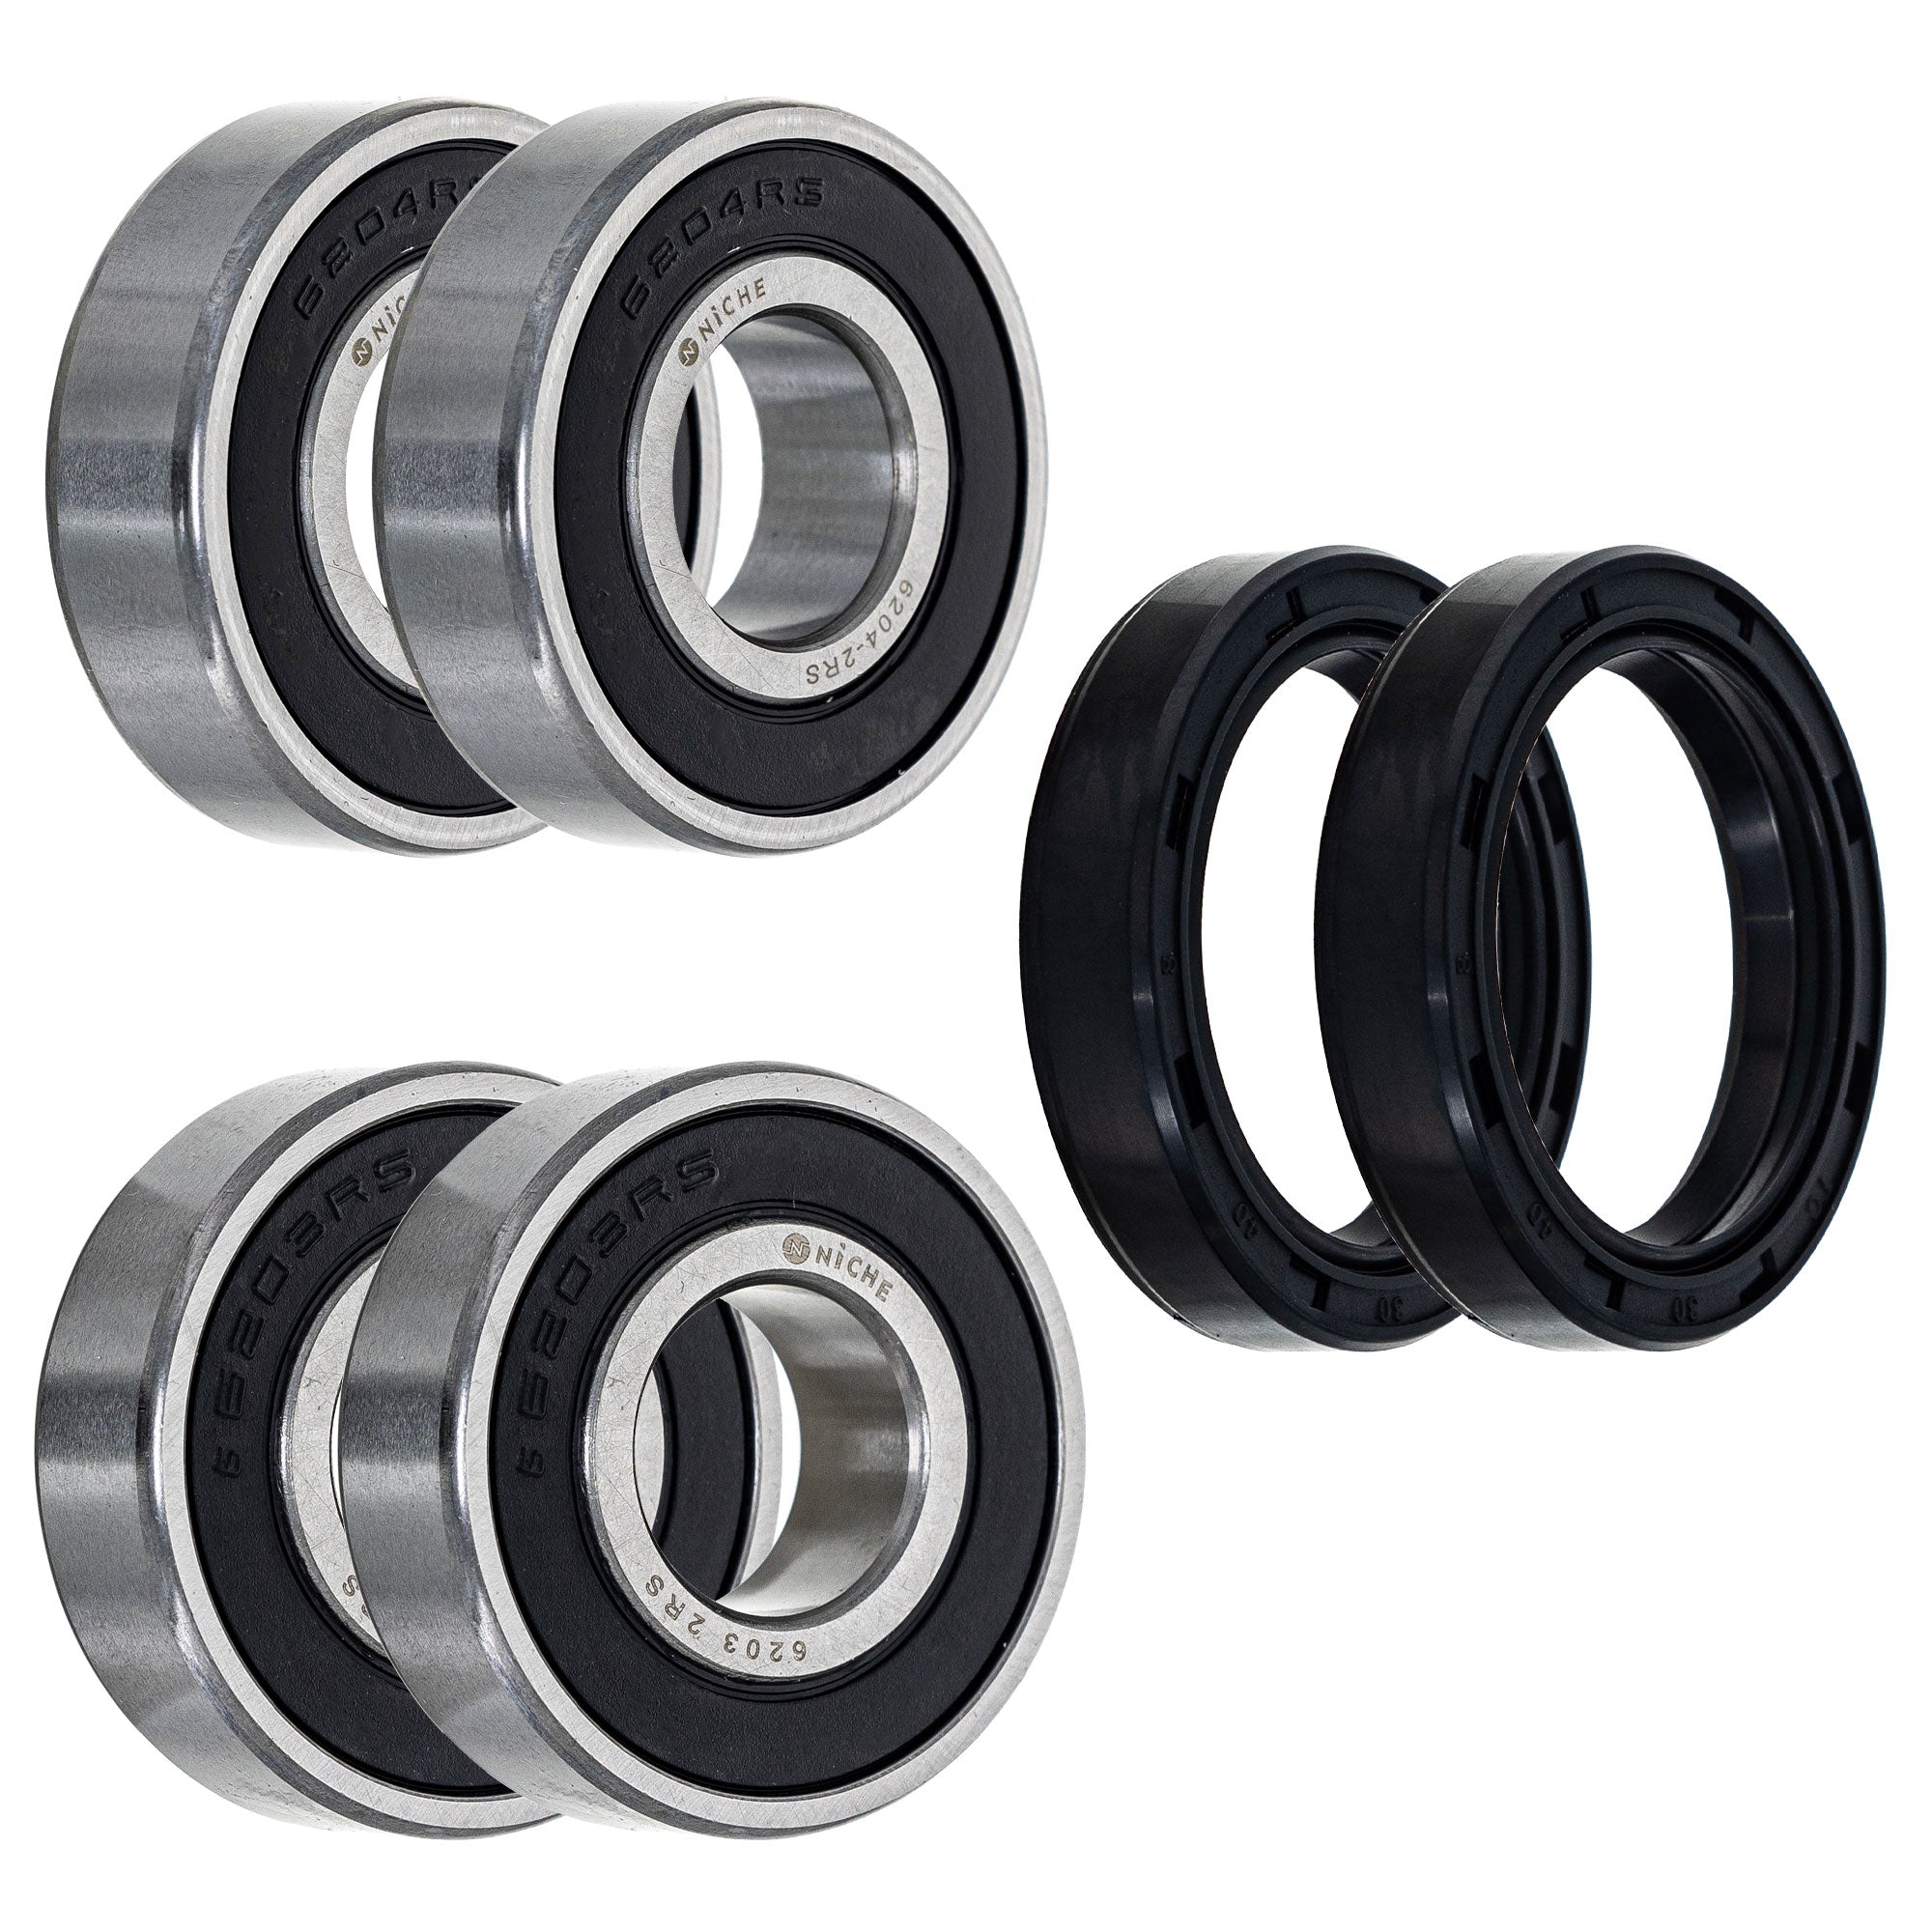 Wheel Bearing Seal Kit for zOTHER Ref No G650GS F650GS NICHE MK1008974